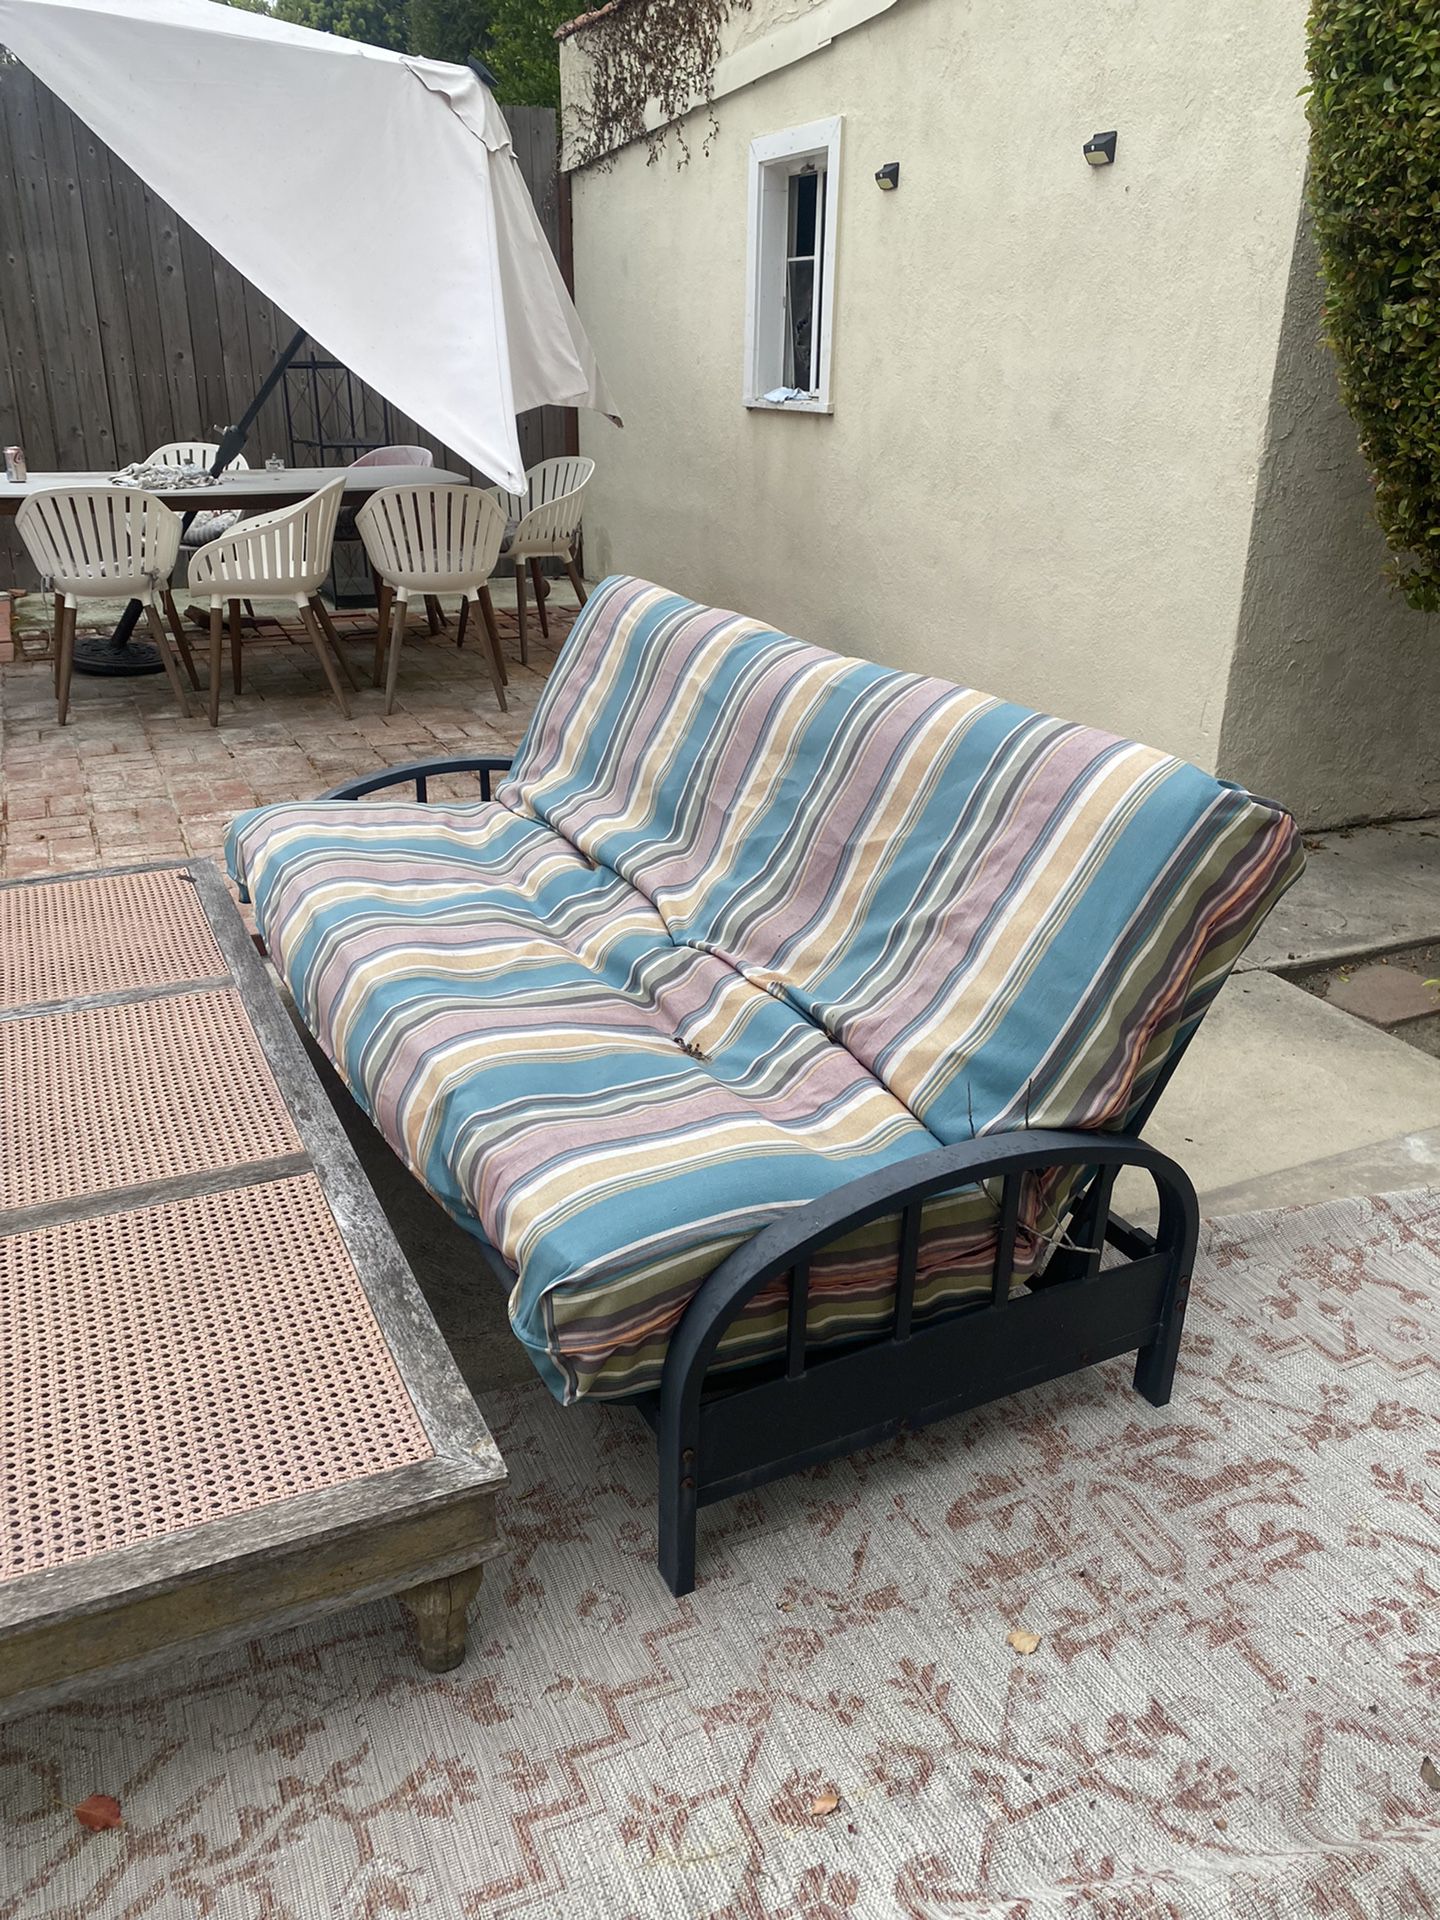 FREE FUTON for Indoor Or Outdoor Use 